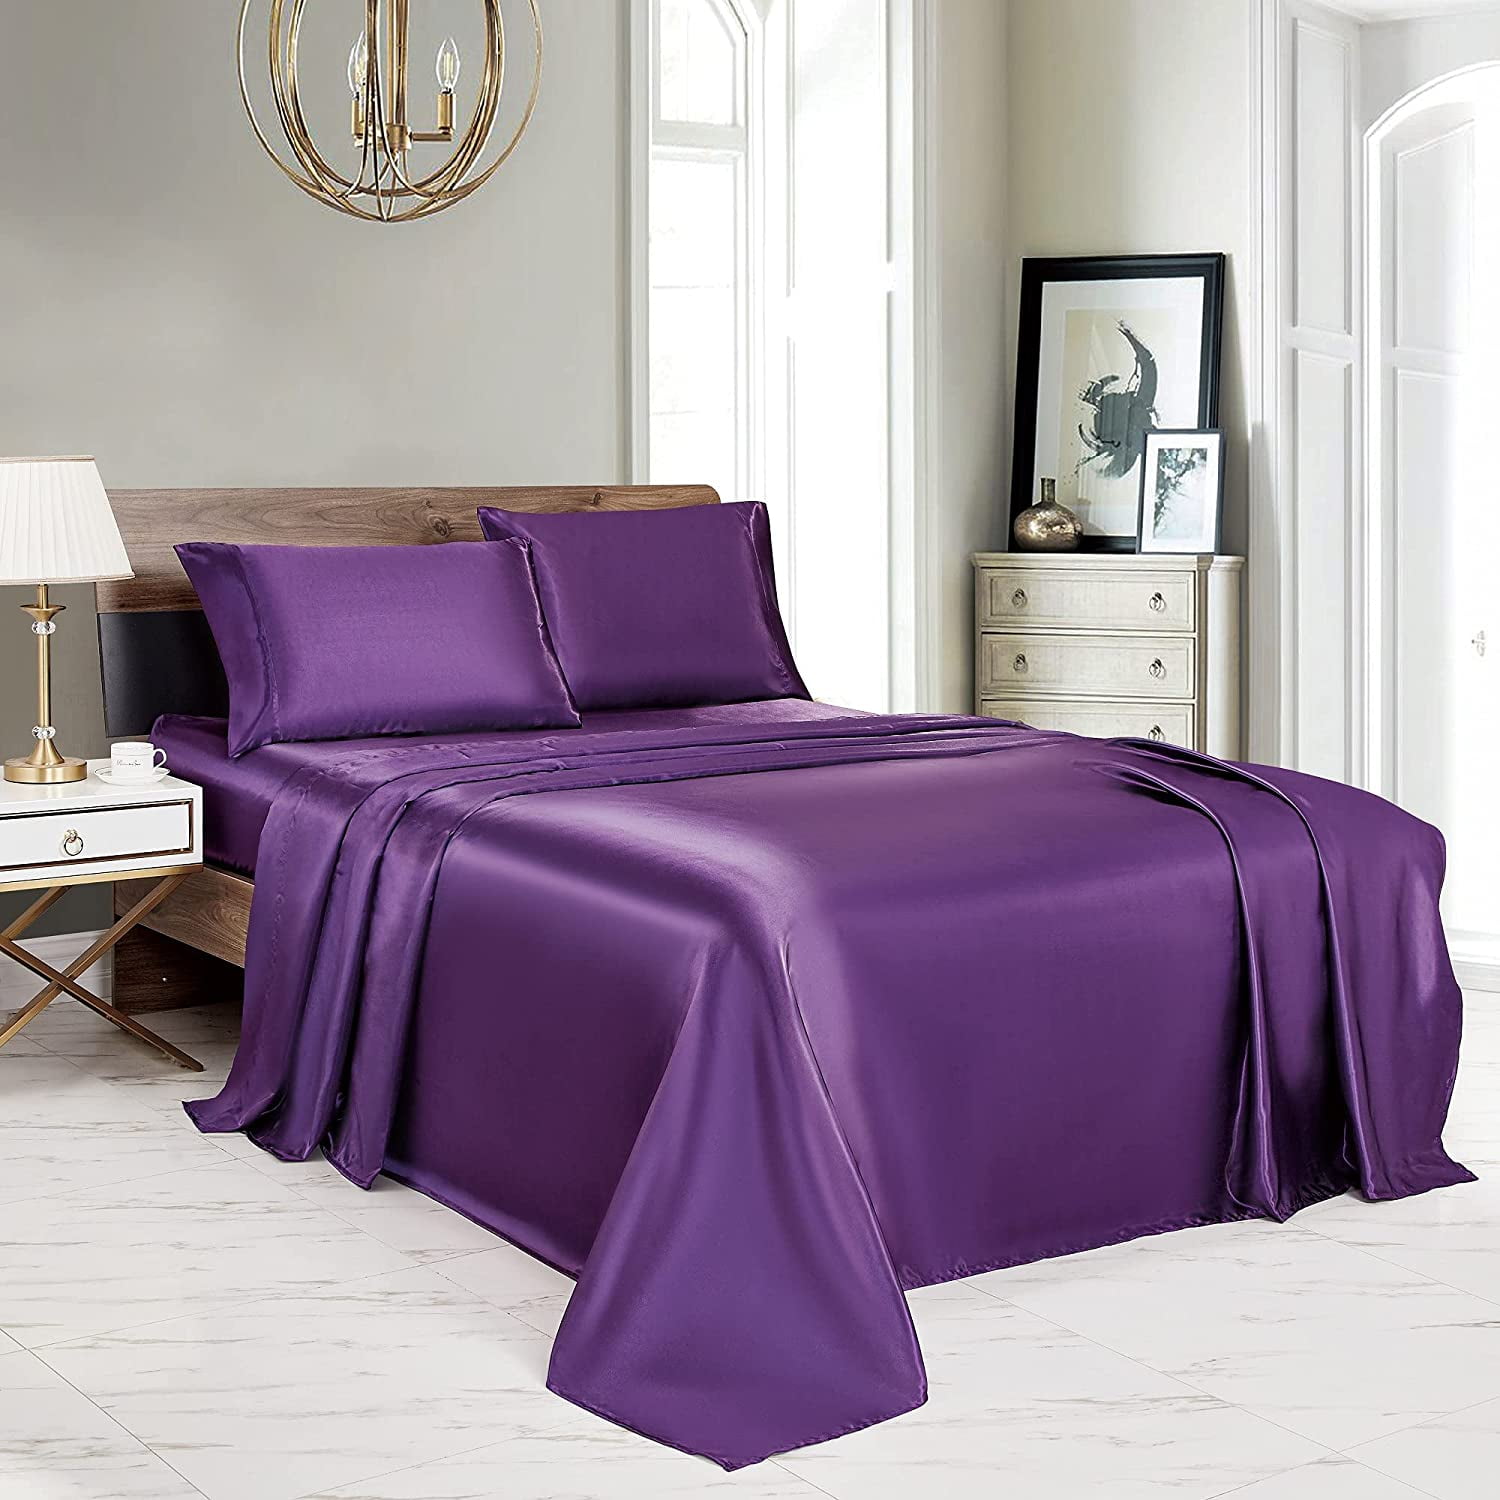 New Full Size High Quality Silk Feel Satin Pillowcase+Fitted+Flat Bed Sheet Set 